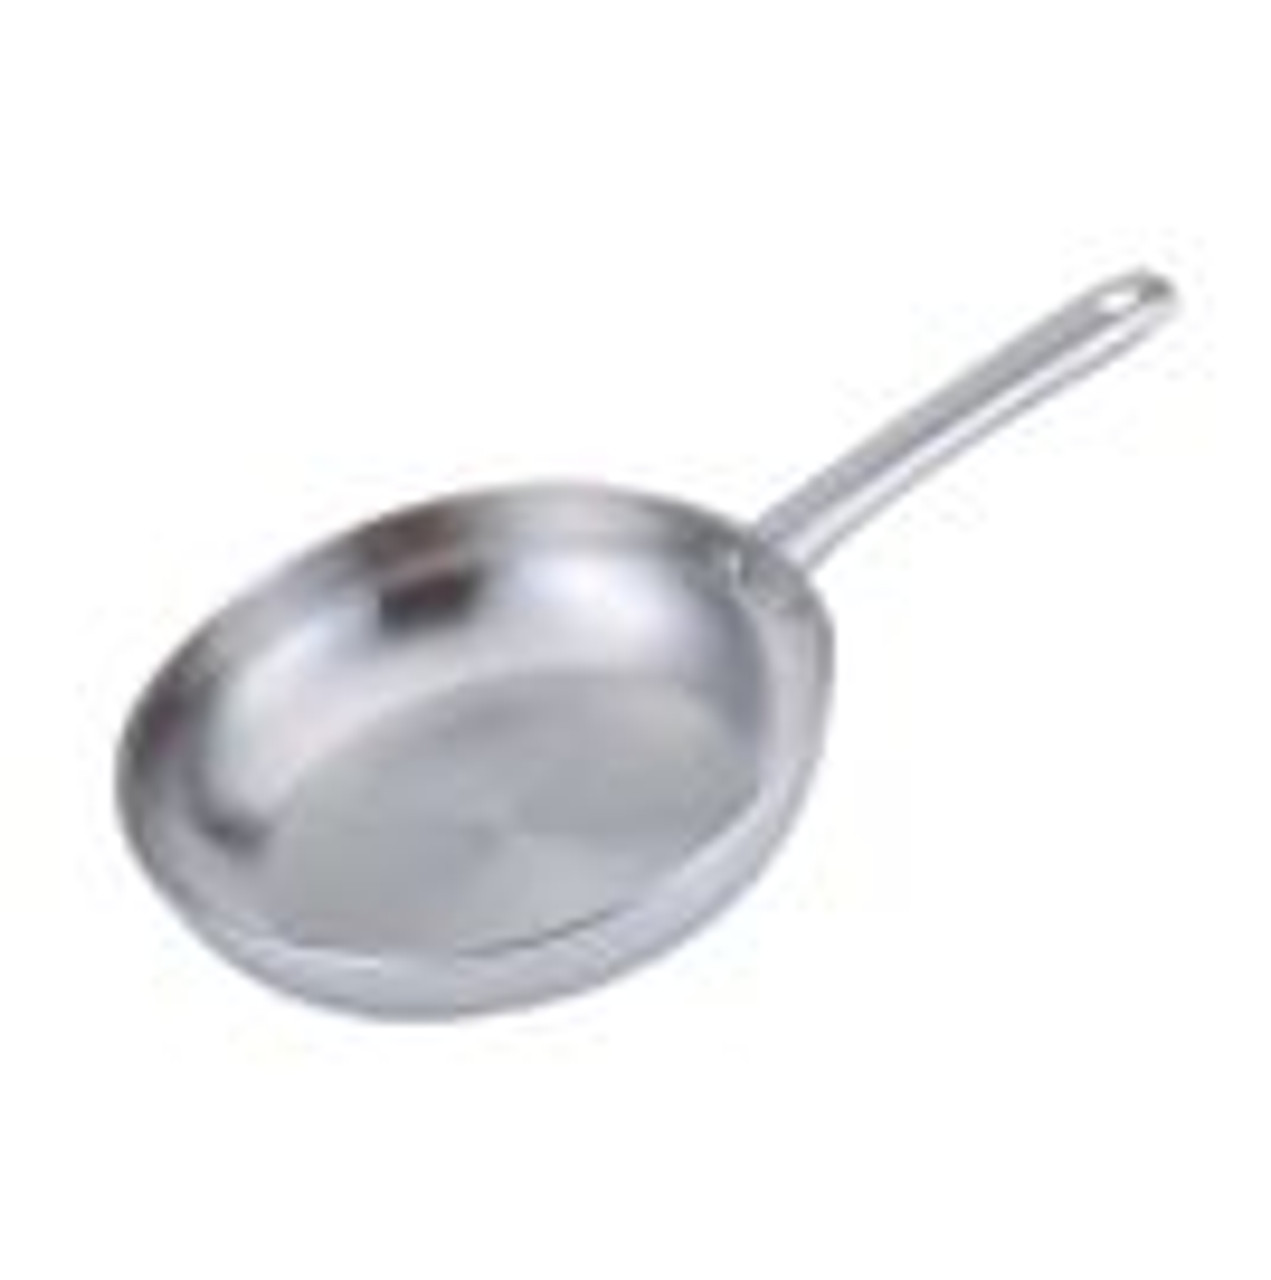 https://cdn11.bigcommerce.com/s-q0oajb576s/images/stencil/1280x1280/products/1347/3703/culinary-edge-classic-stainless-steel-10-fry-pan-small-image-1__32737.1637184388.jpg?c=1?imbypass=on